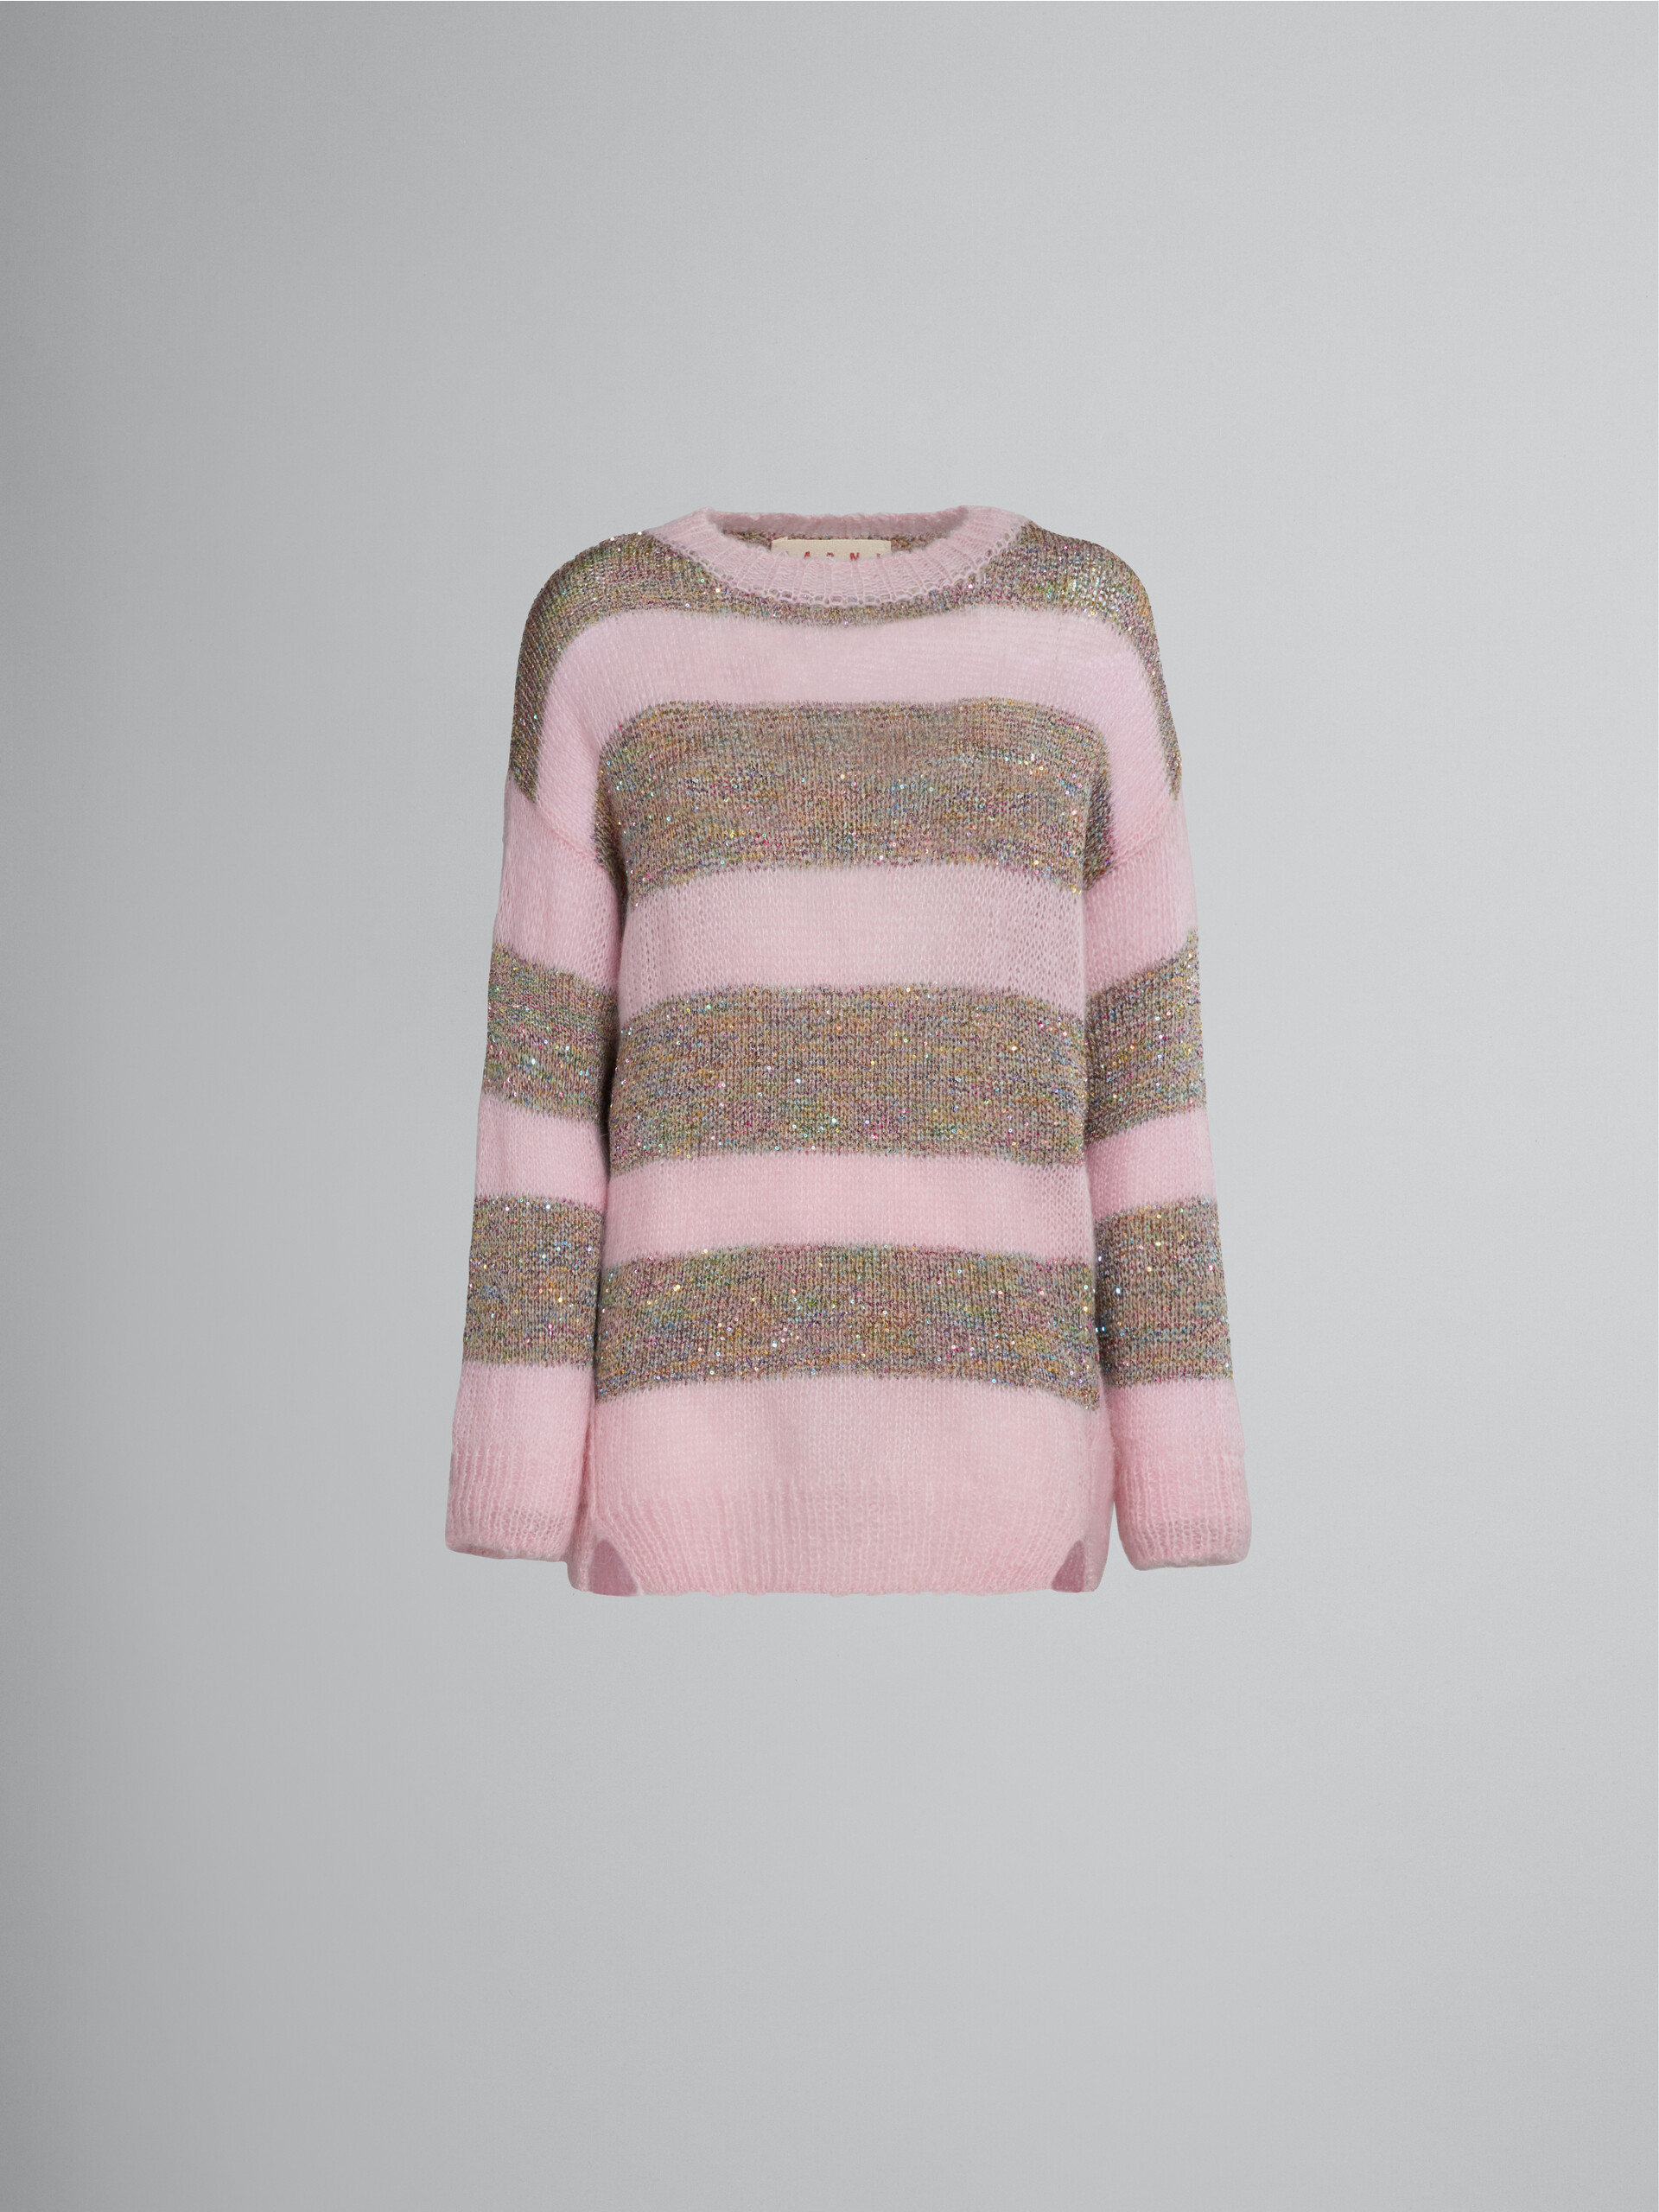 Sweater in striped pink mohair and wool - Pullovers - Image 1